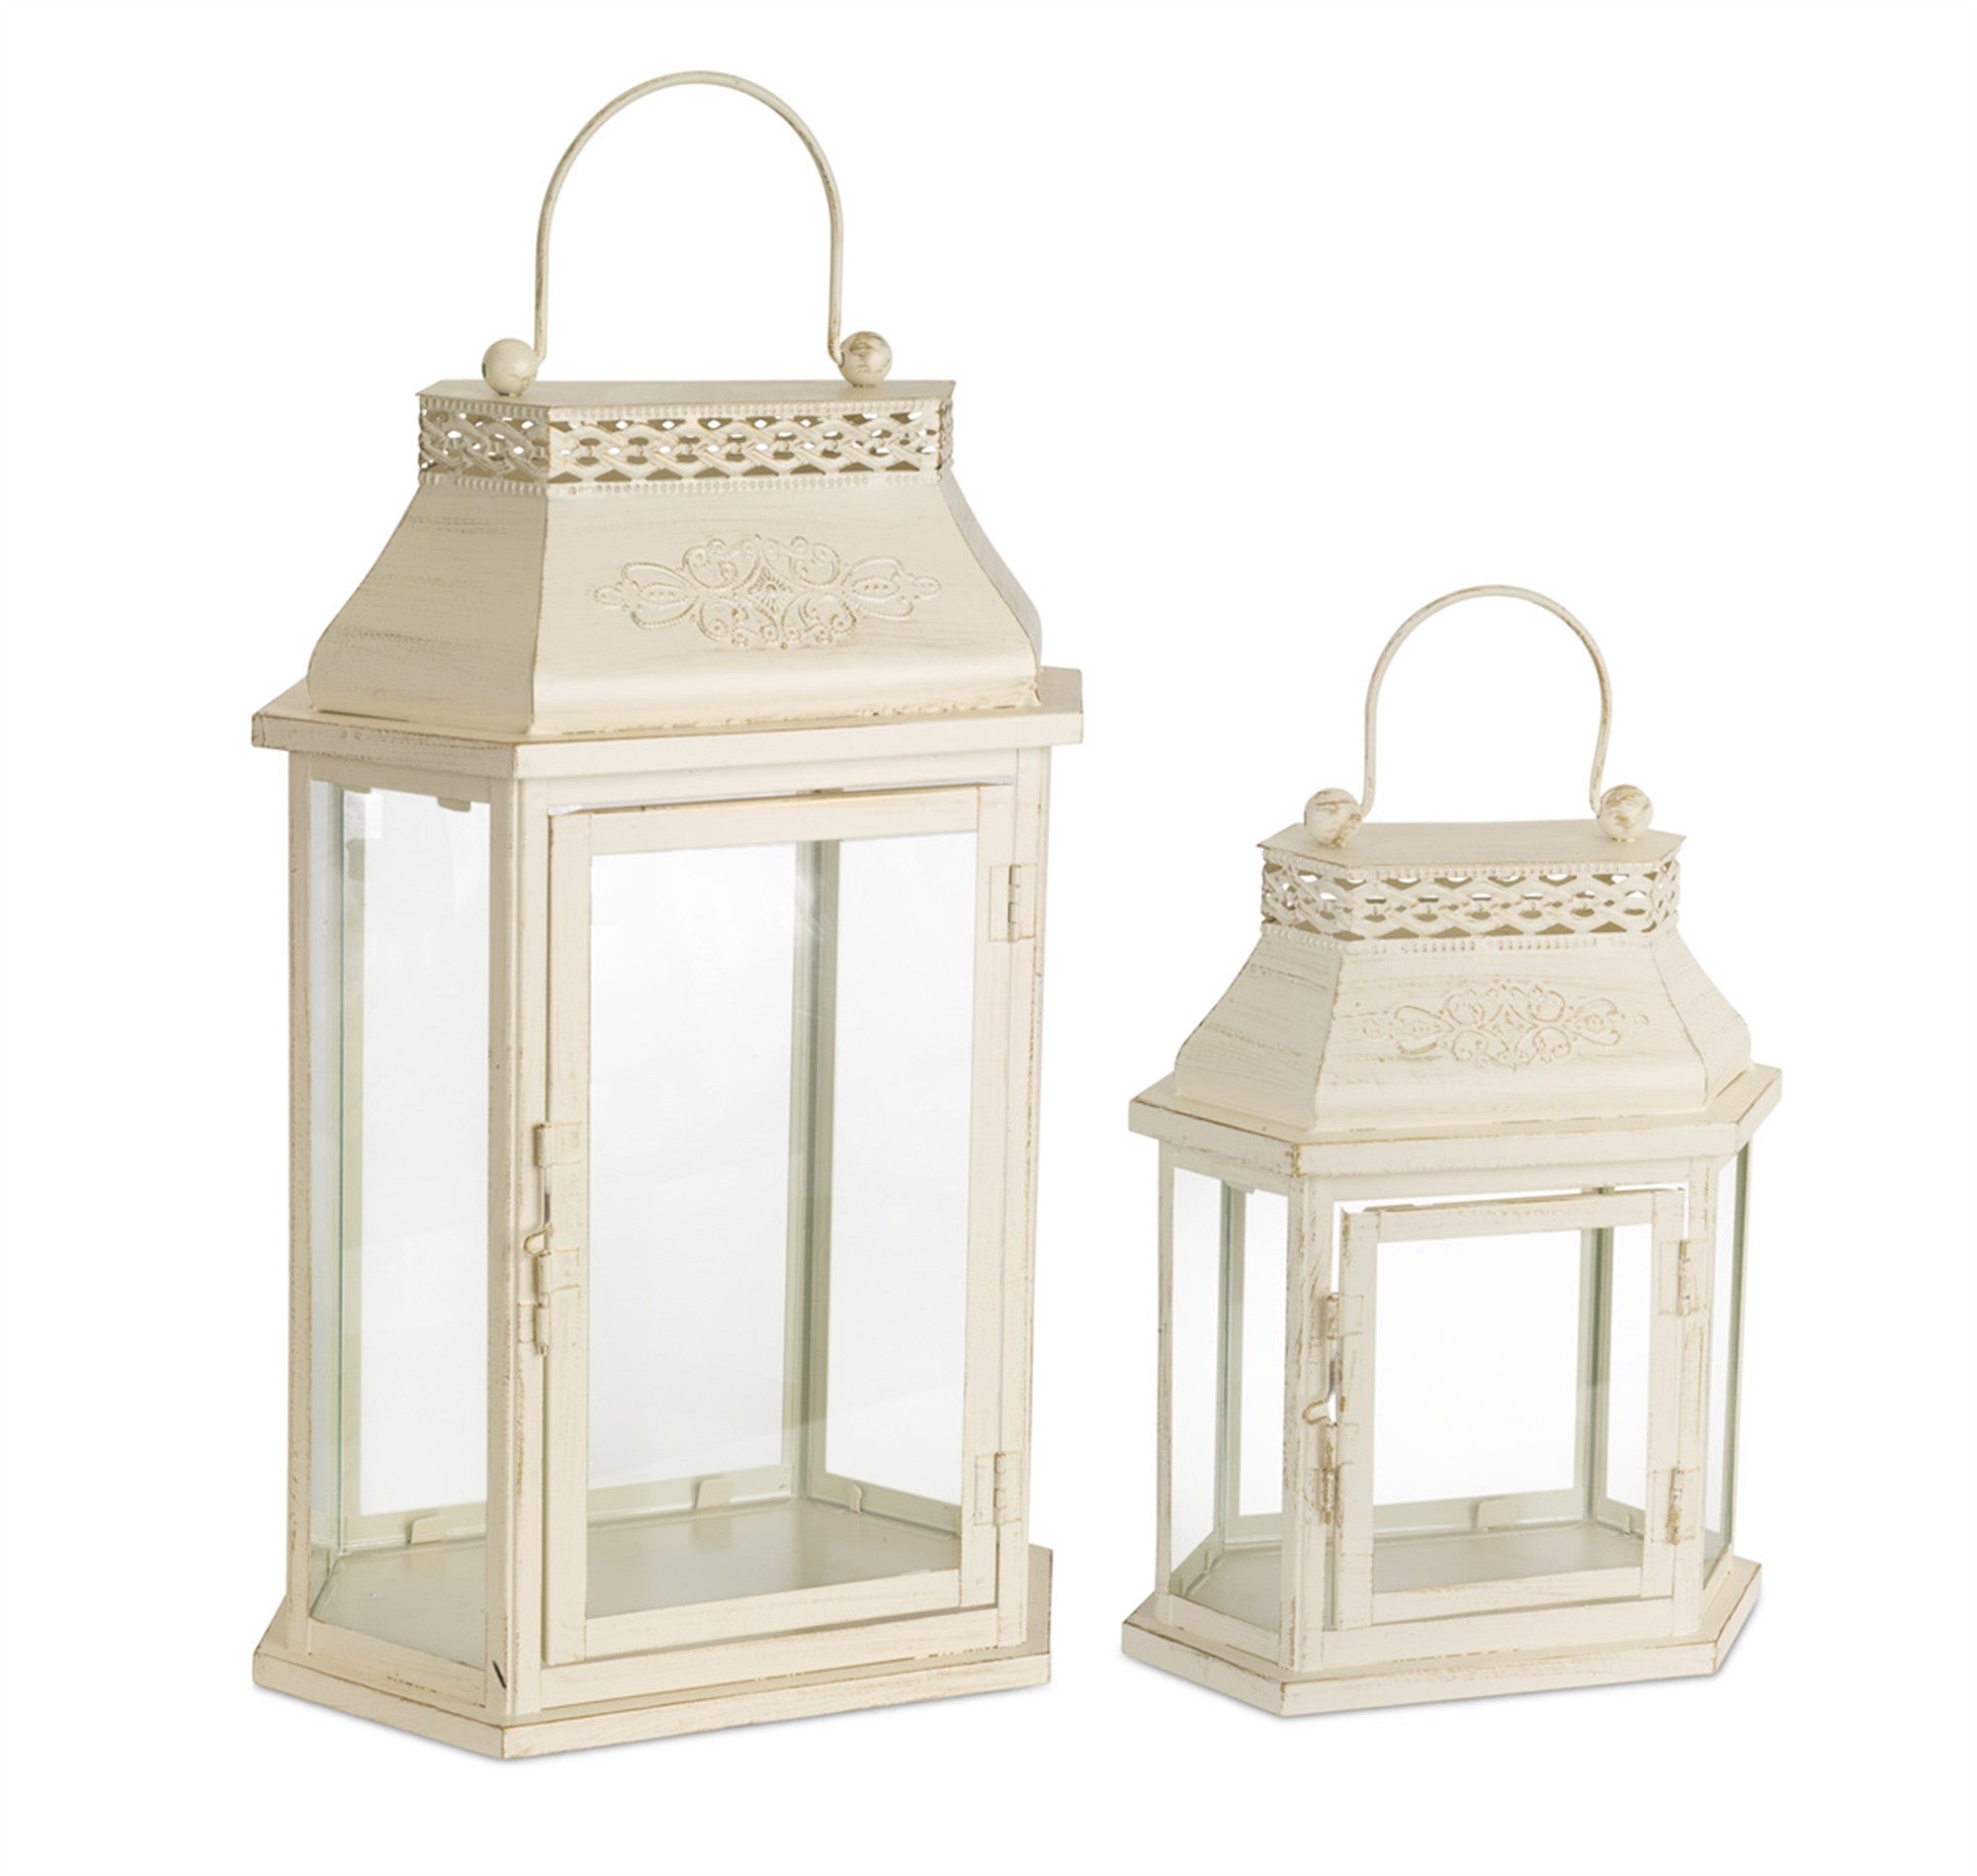 Set-Of-Two-Beige-Flameless-Floor-Lantern-Candle-Holder-Candle-Holders